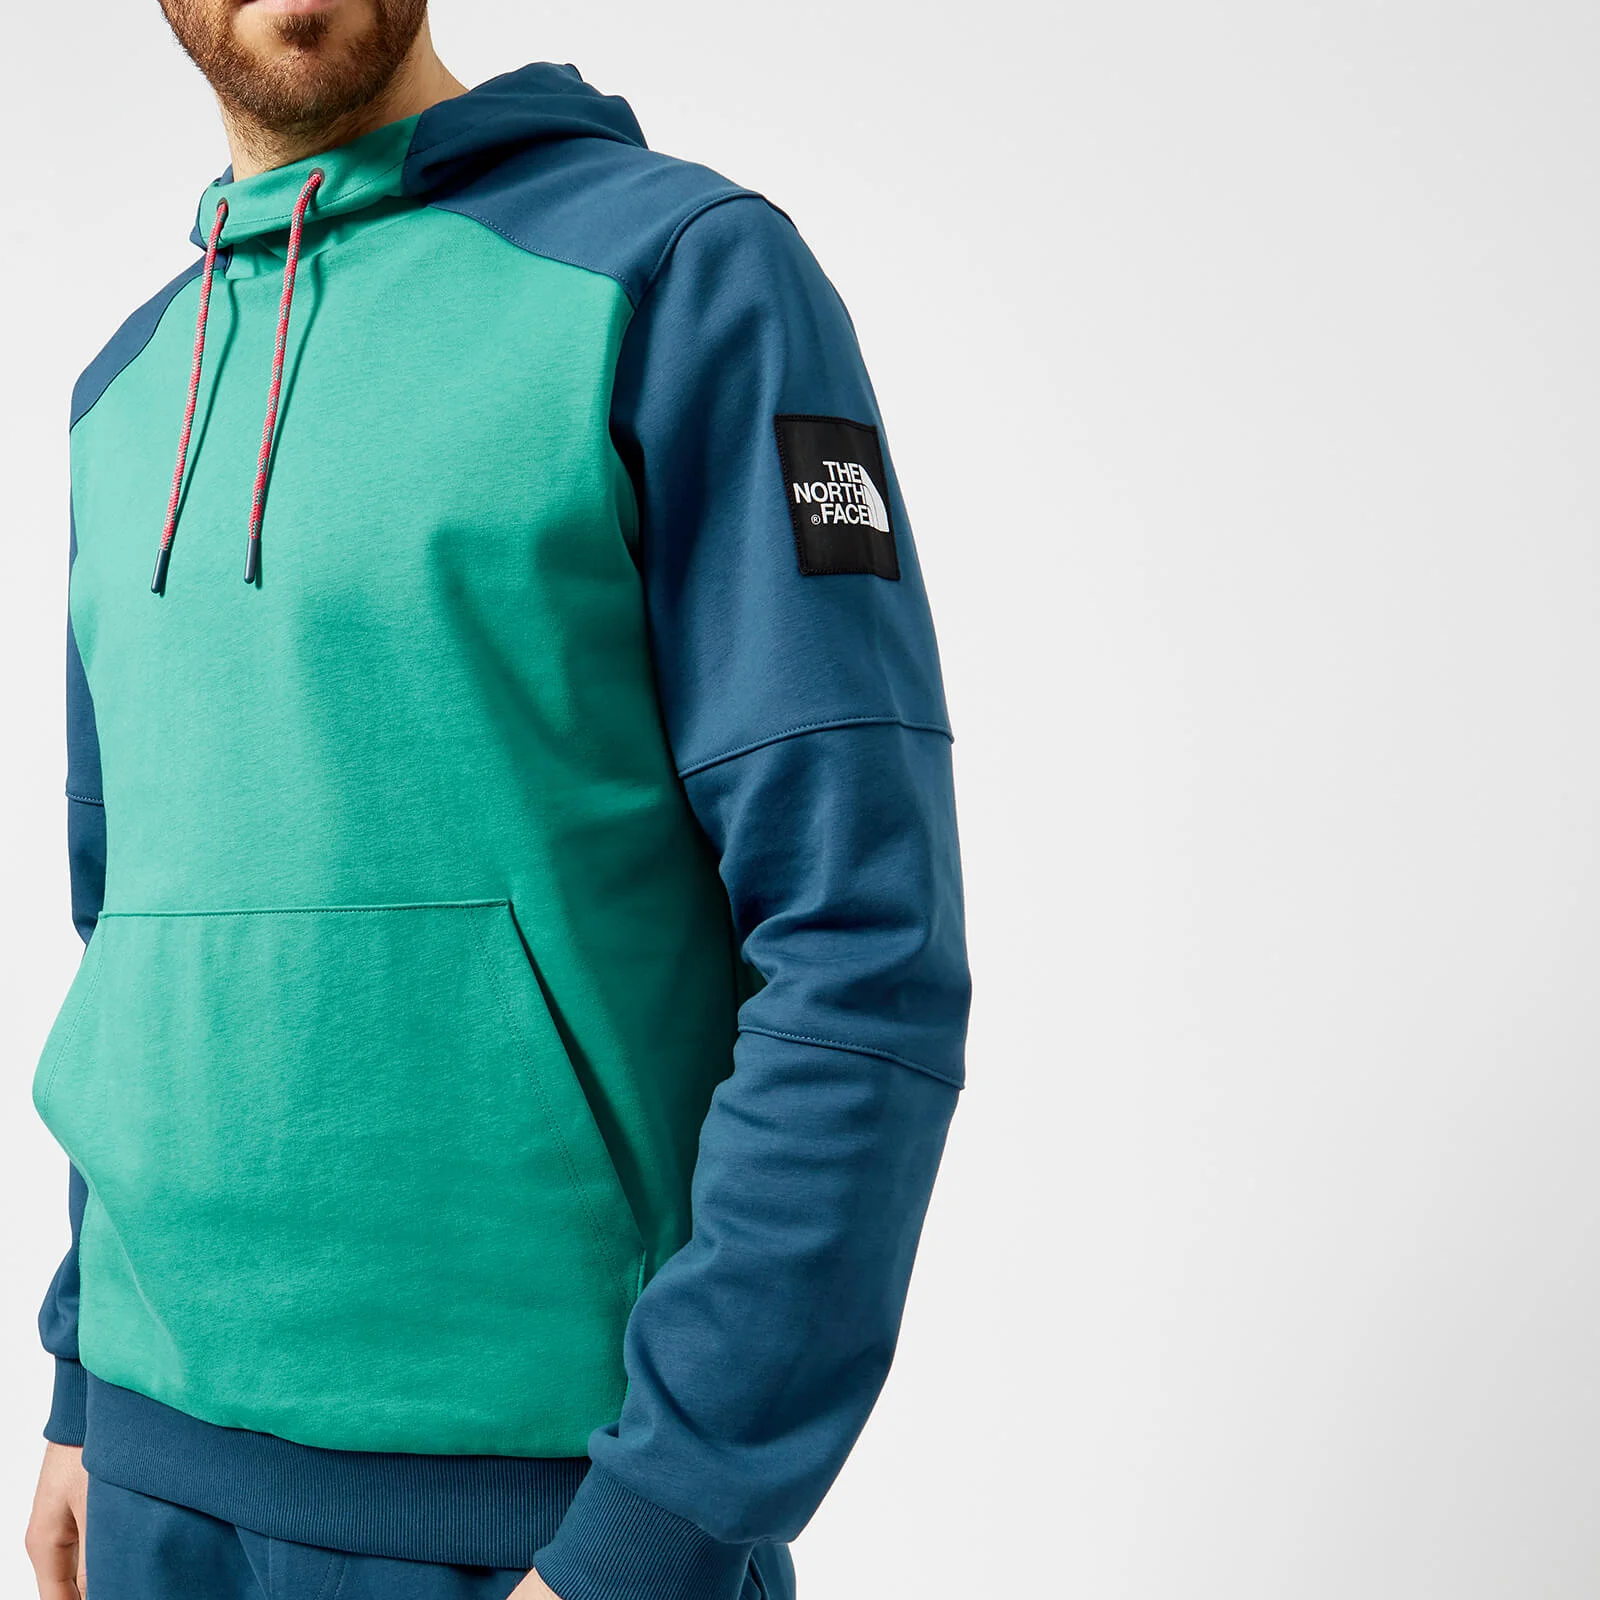 The North Face Men's Fine Box Hoodie - Porcelain Green/Blue Wing Teal Image 1